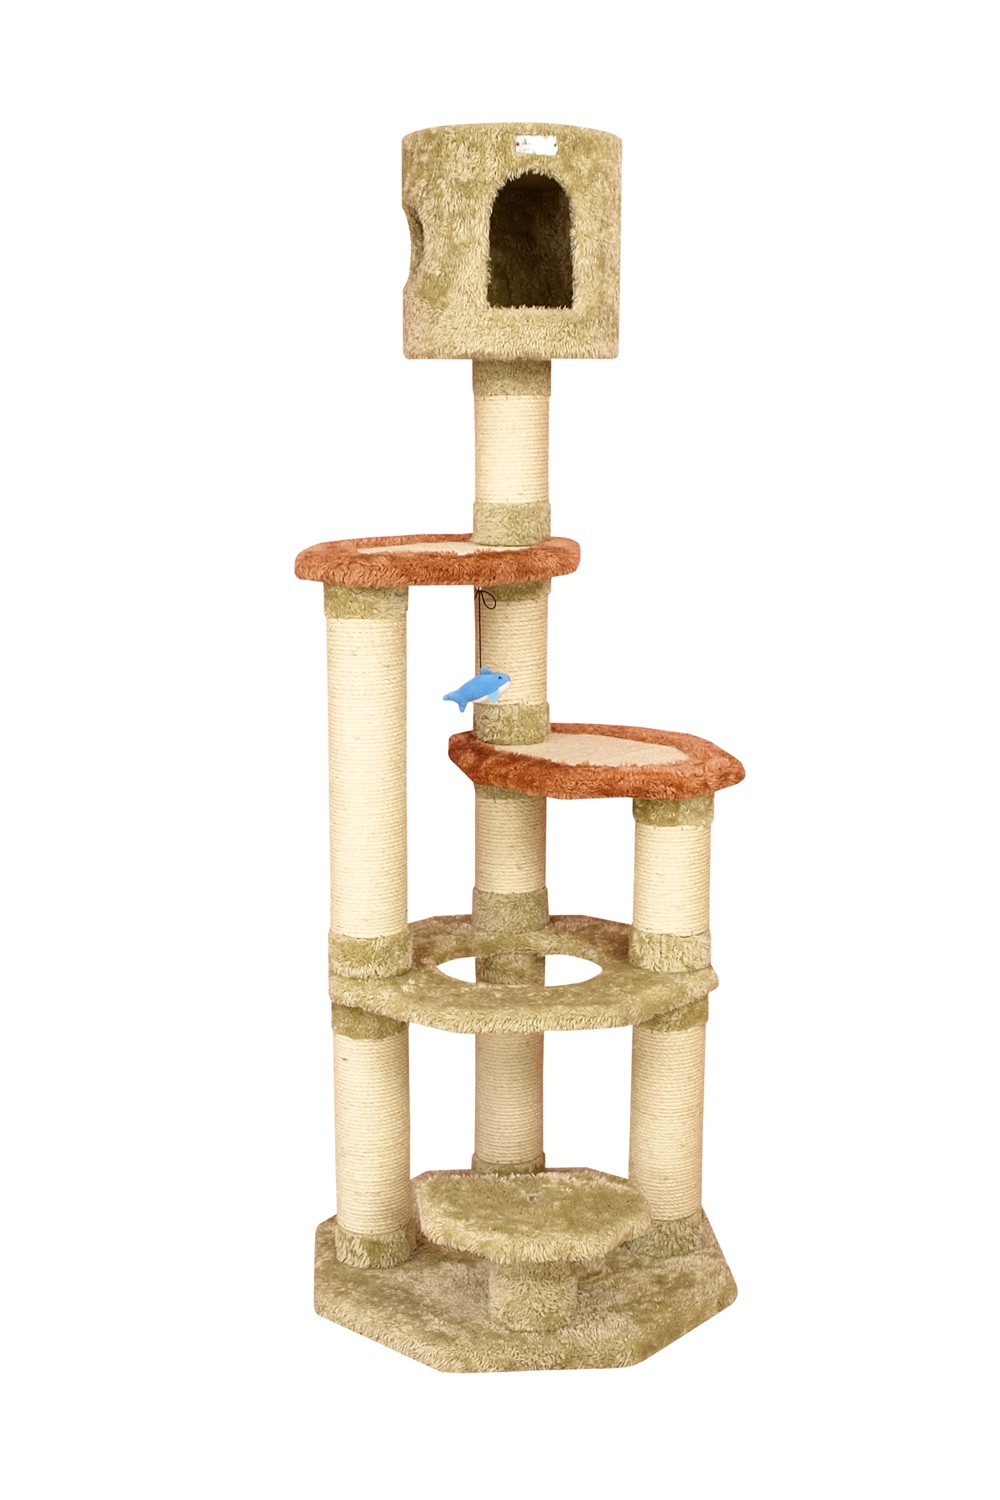 Armarkat Real Wood Cat Climber, Cat Junggle Tree With Sisal Carpet Platforms for Kittens Pets Play, X6606